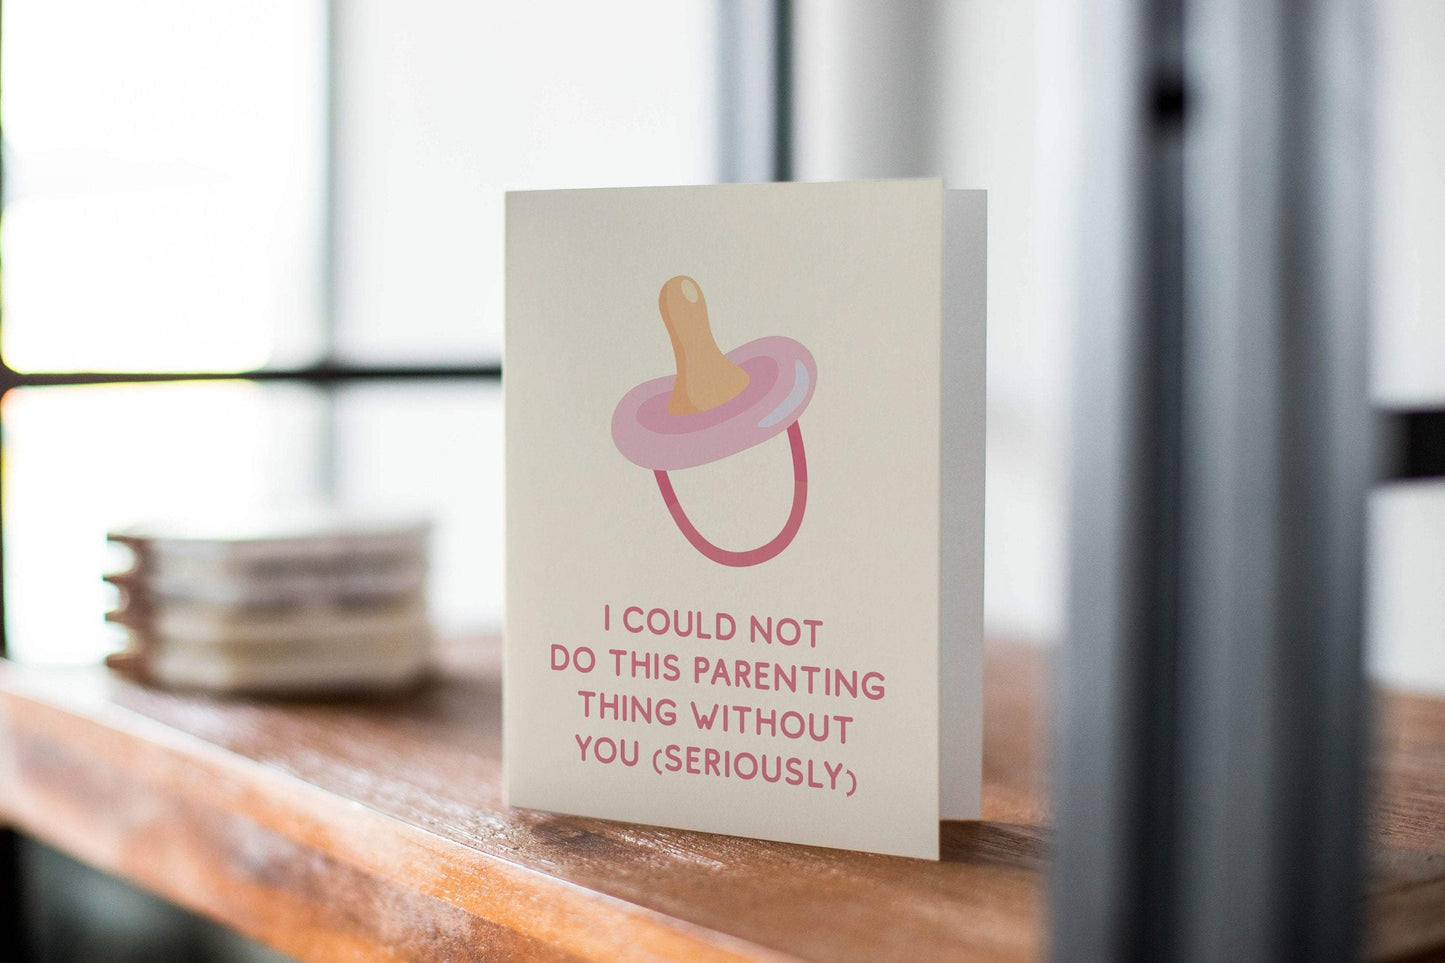 I Could Not Do This Parenting Thing Without You. - Parent Support - Thinking Of You Card.